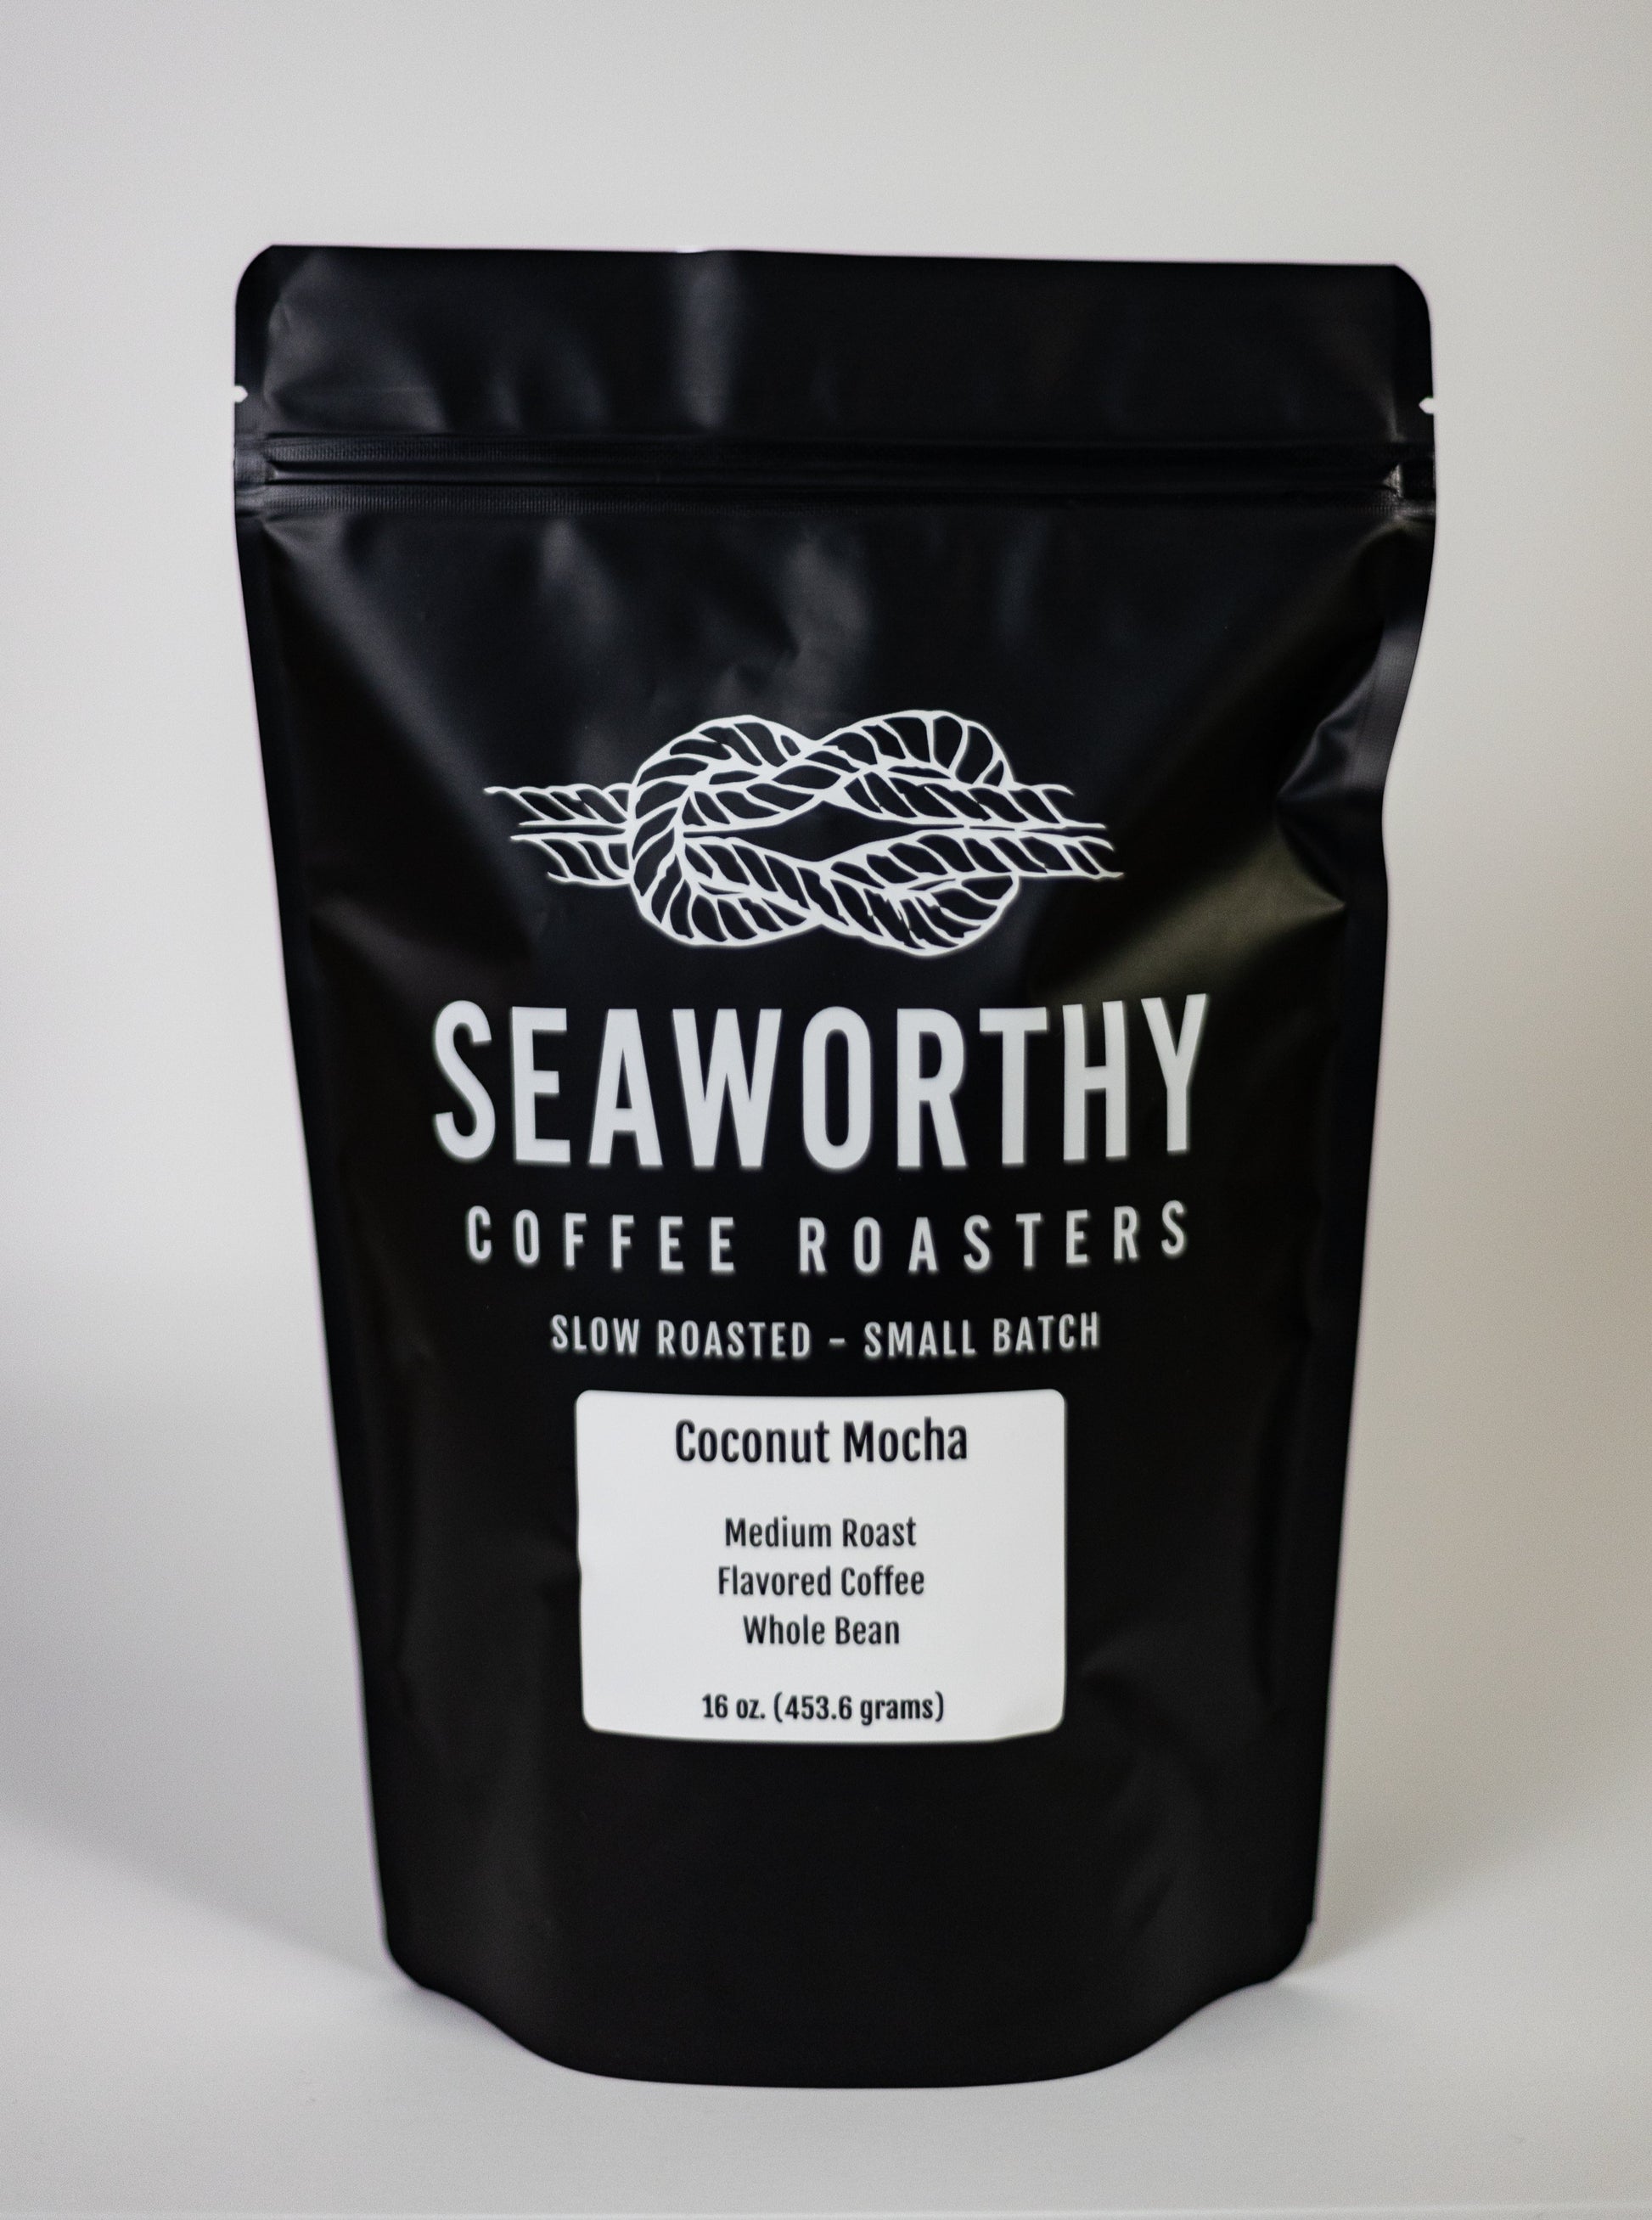 Seaworthy slow roasted, small batch coffee. Inspired by the beach, Coconut Mocha smacks with fun summer flavor vibes. Whether you enjoy this one hot or on the rocks, we are certain you will be instantly transported to the seaside within one sip.